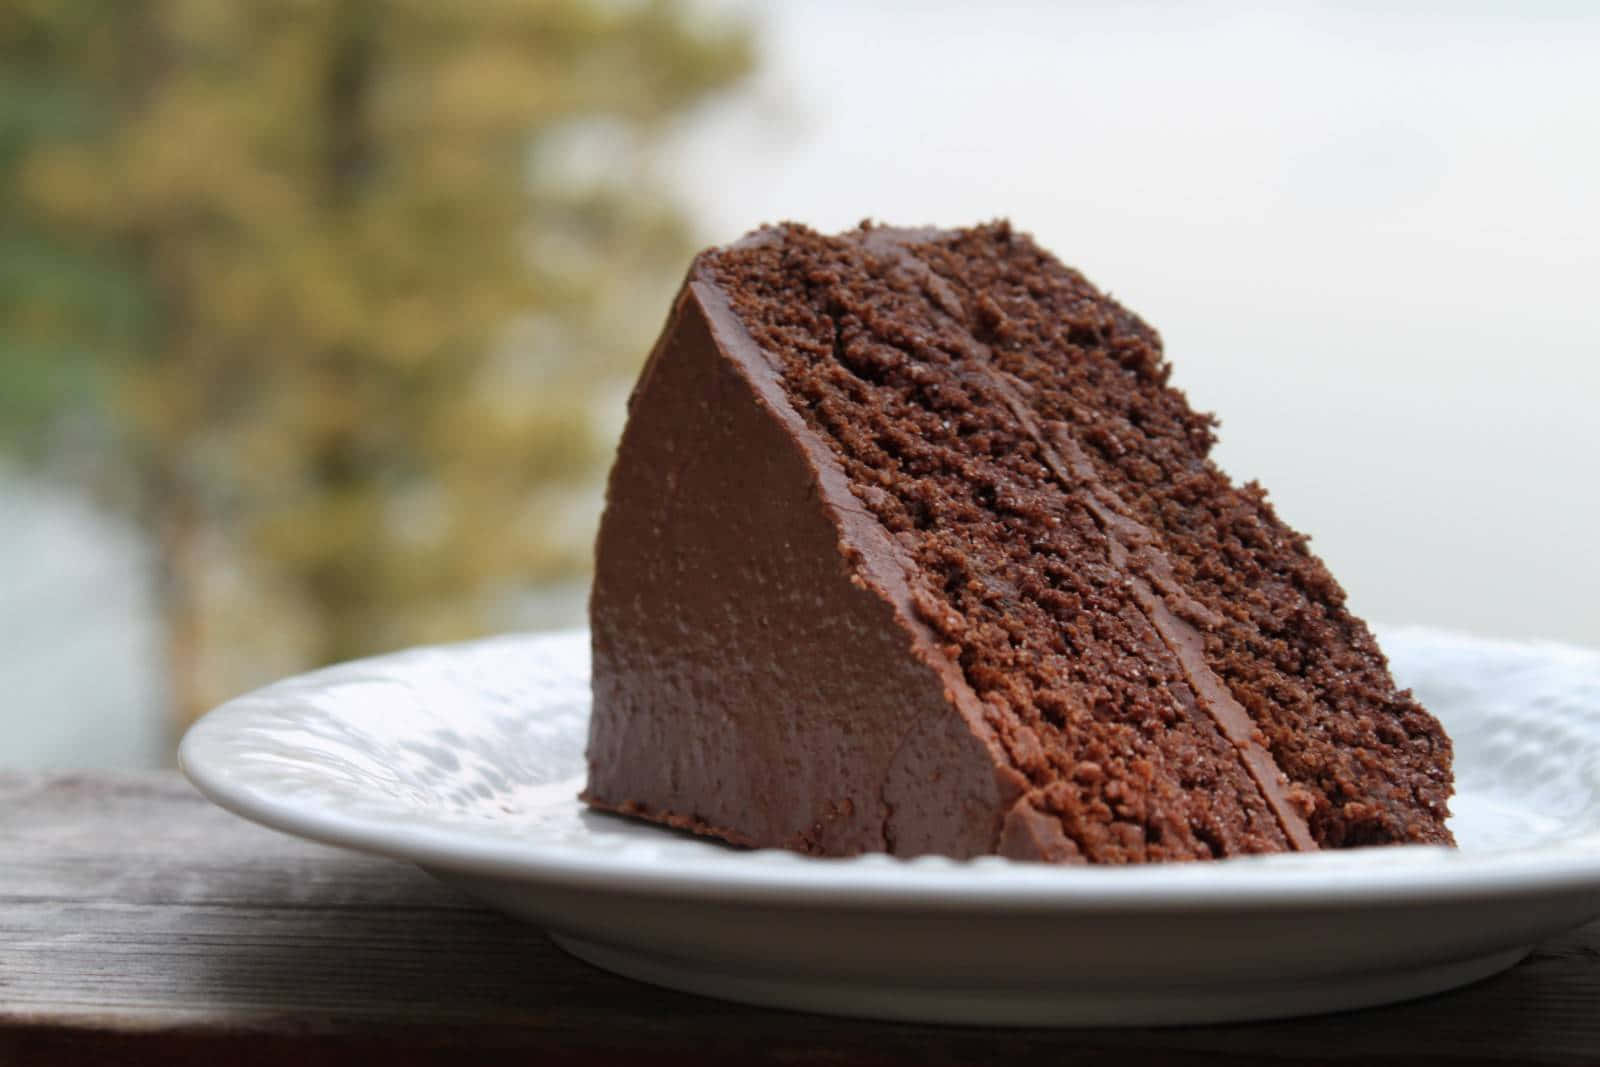 Gooey Delight: Heavenly Chocolate Cake on a Plate